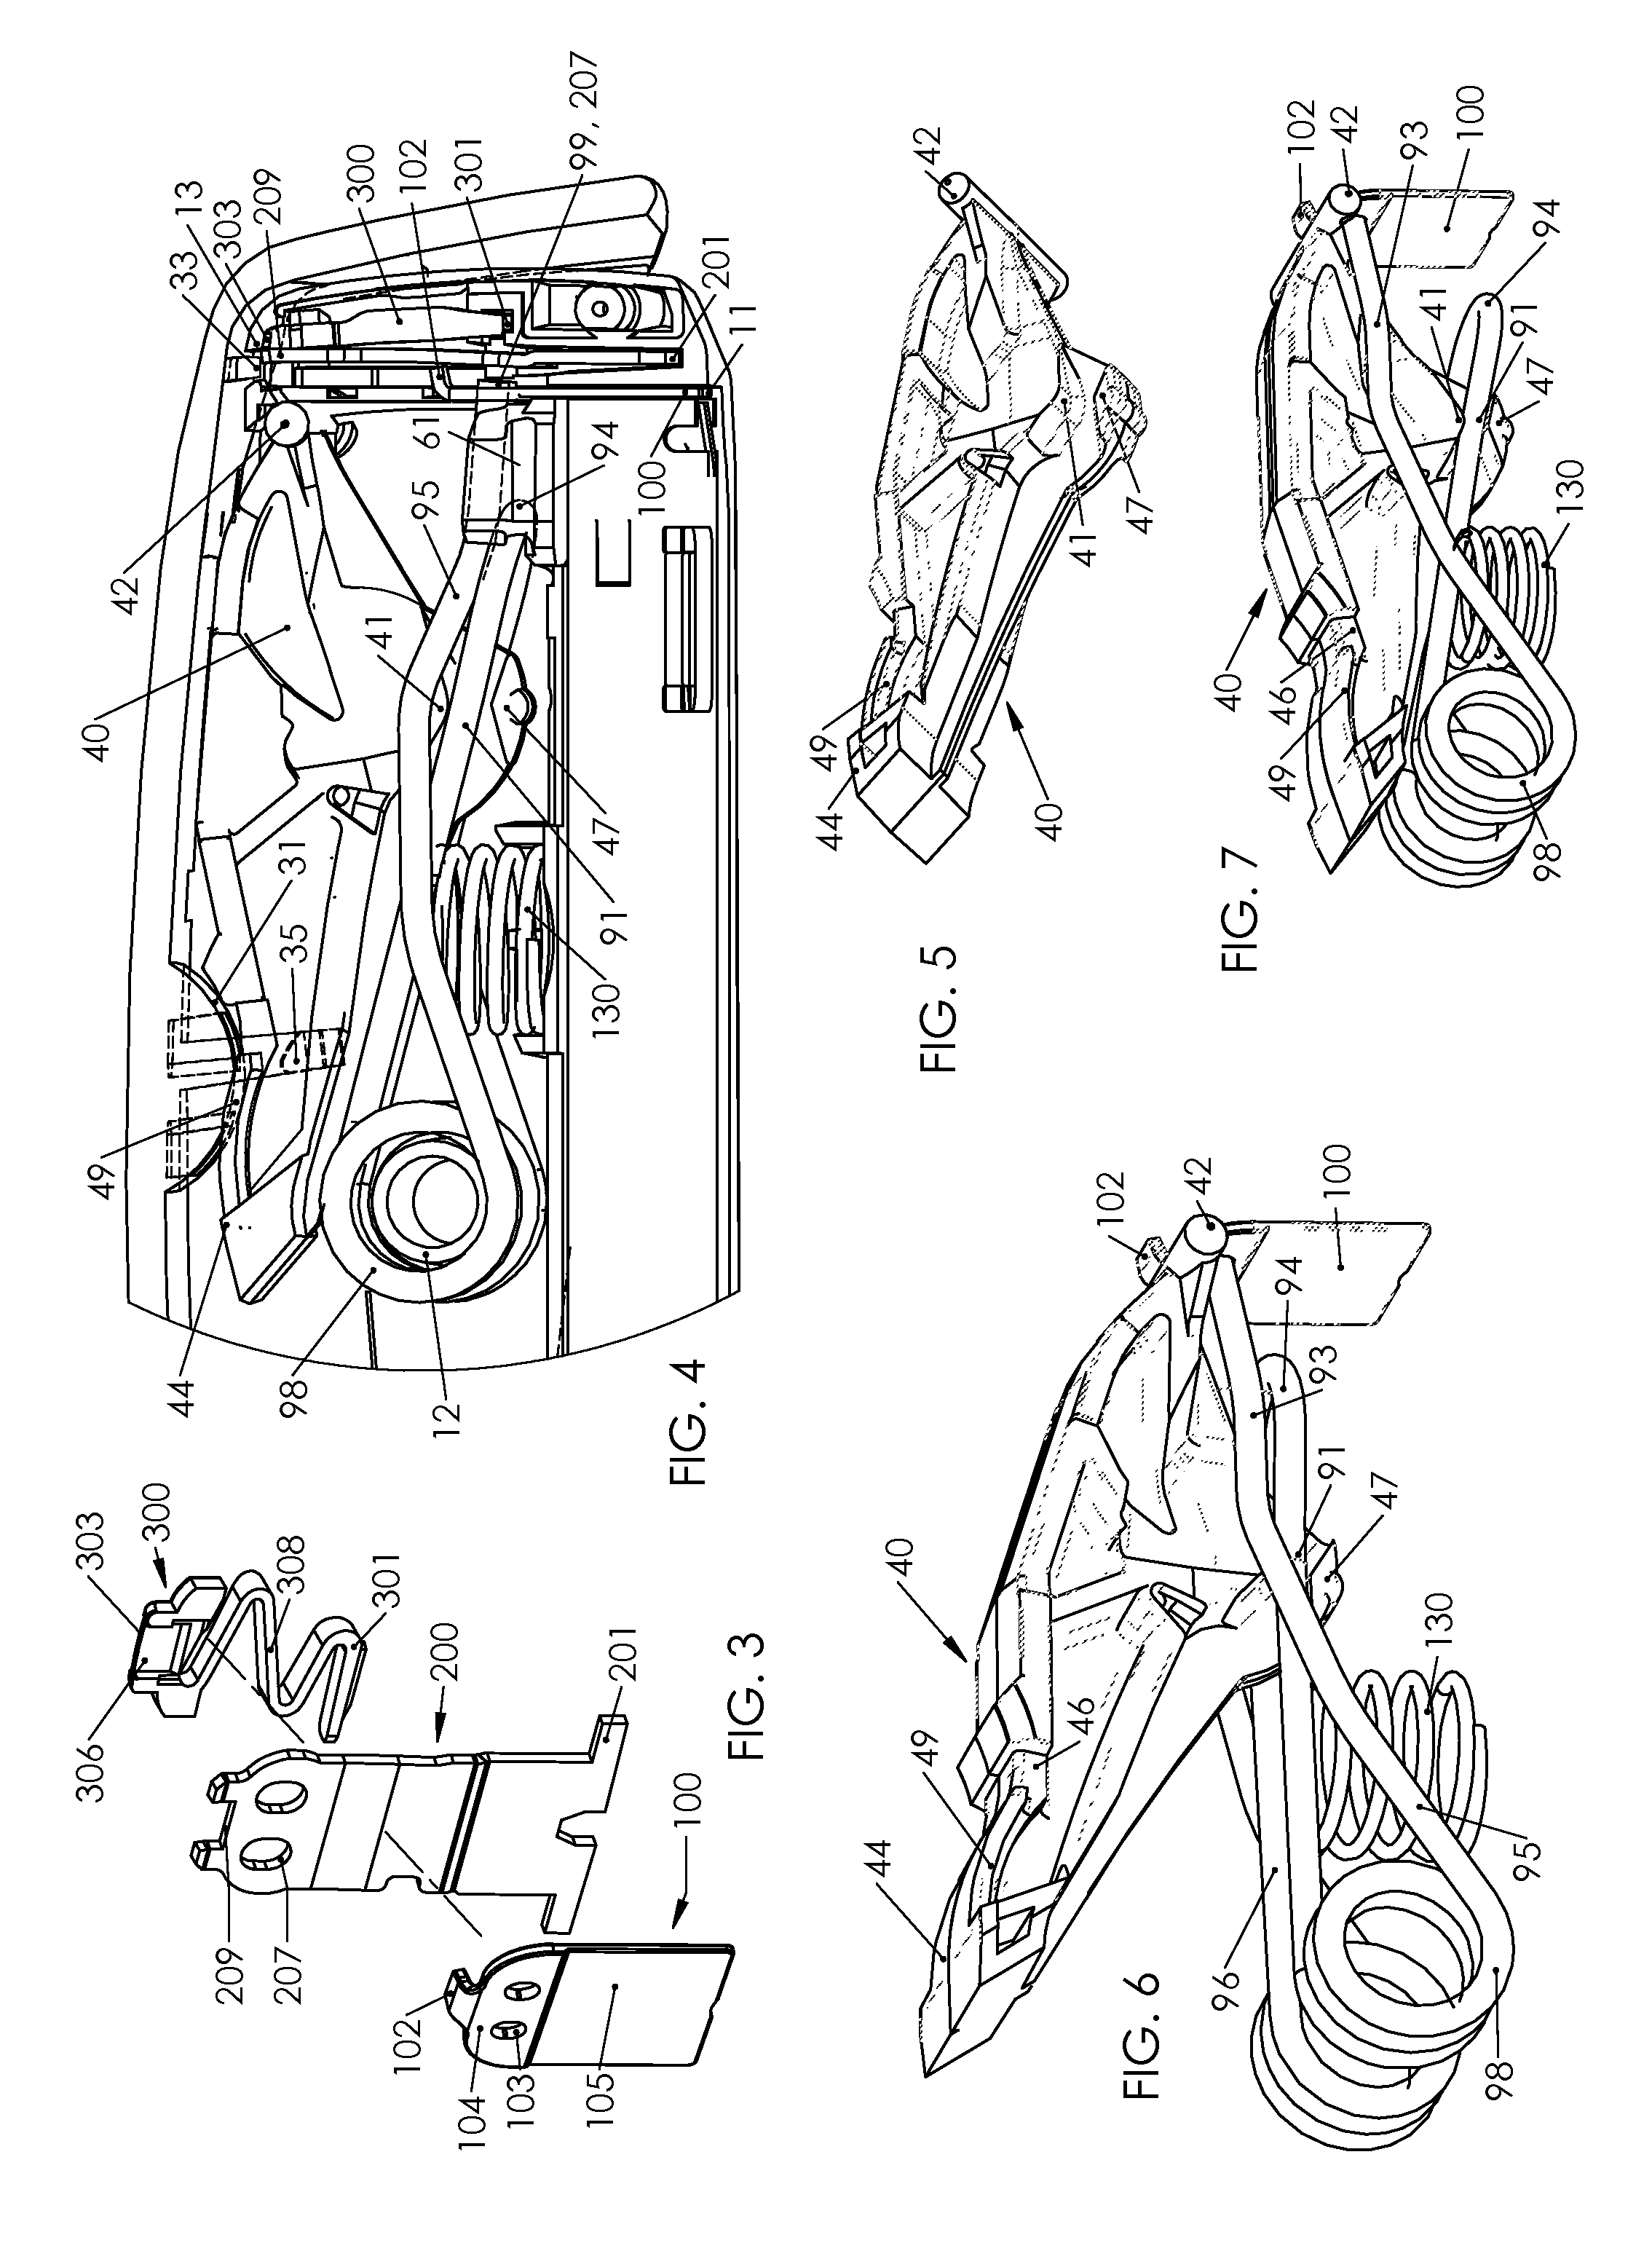 Power spring configurations for a fastening device